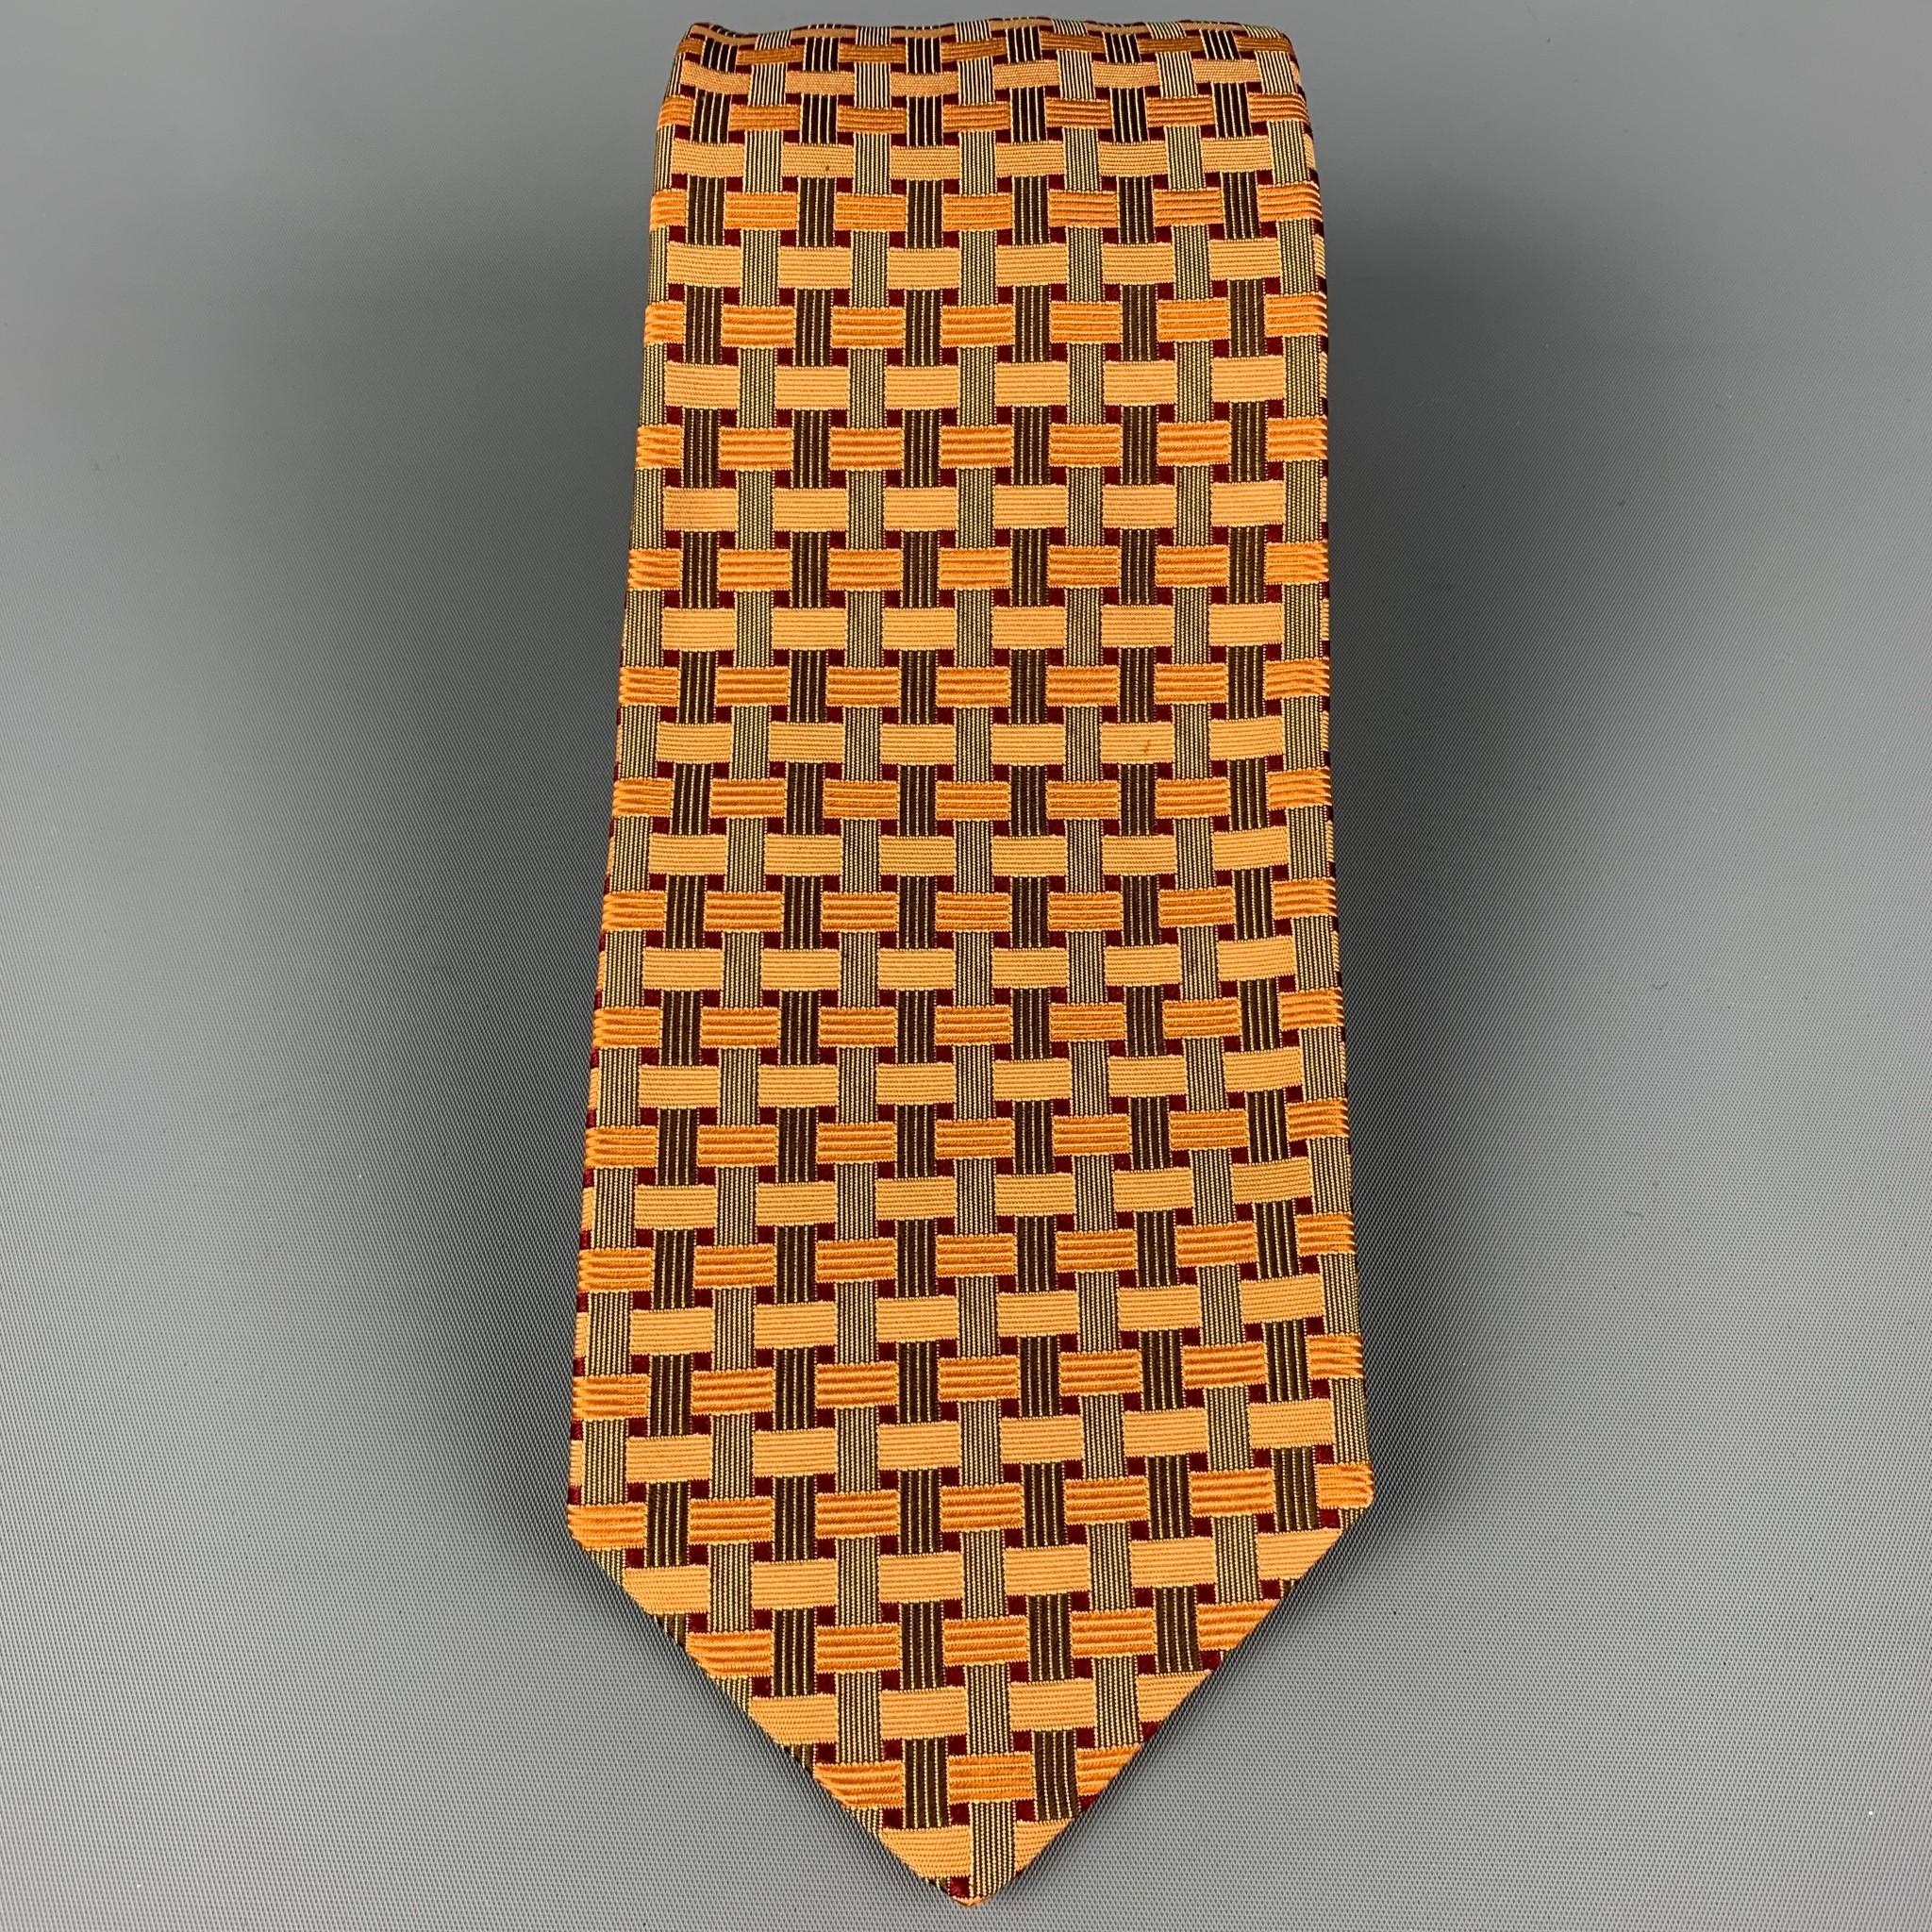 KITON necktie comes in a gold & burgundy silk with a all over woven print. Made in Italy .

Very Good Pre-Owned Condition.
Original Retail Price: $345.00

Width: 3.75 in.
Length: 60 in. 

 